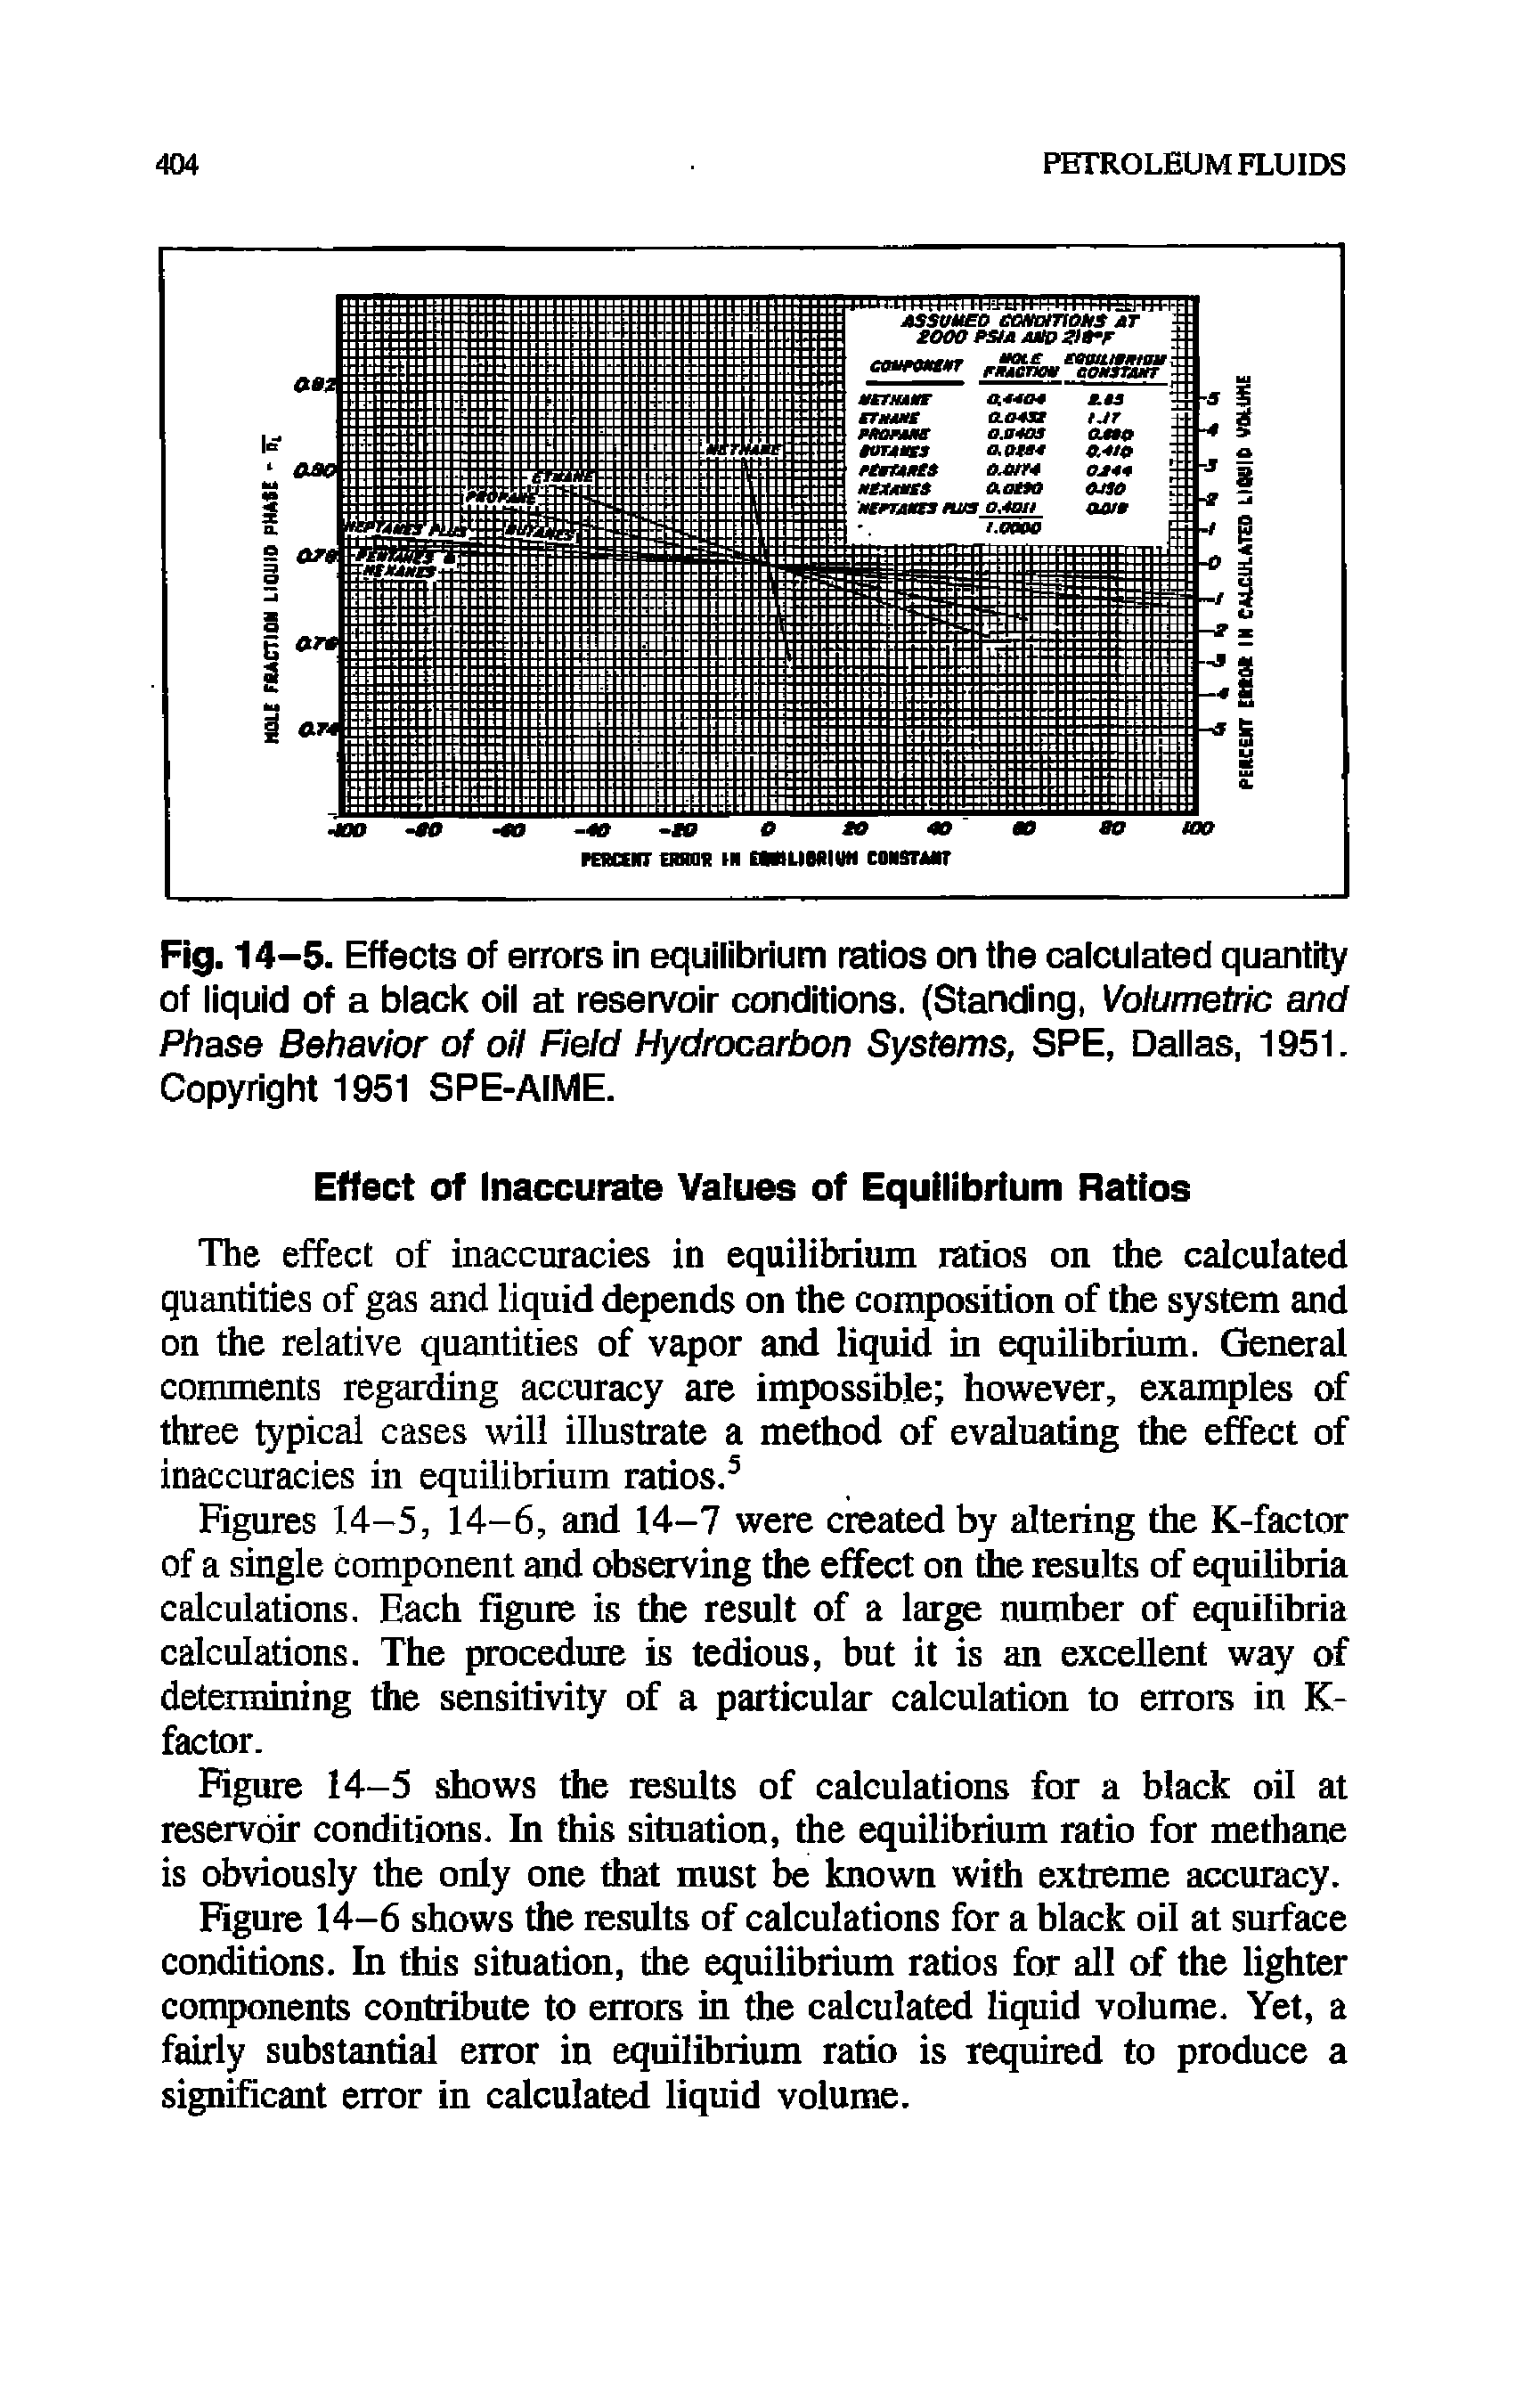 Fig. 14-5. Effects of errors in equilibrium ratios on the calculated quantity of liquid of a black oil at reservoir conditions. (Standing, Volumetric and Phase Behavior of oil Field Hydrocarbon Systems, SPE, Dallas, 1951. Copyright 1951 SPE-AIME.